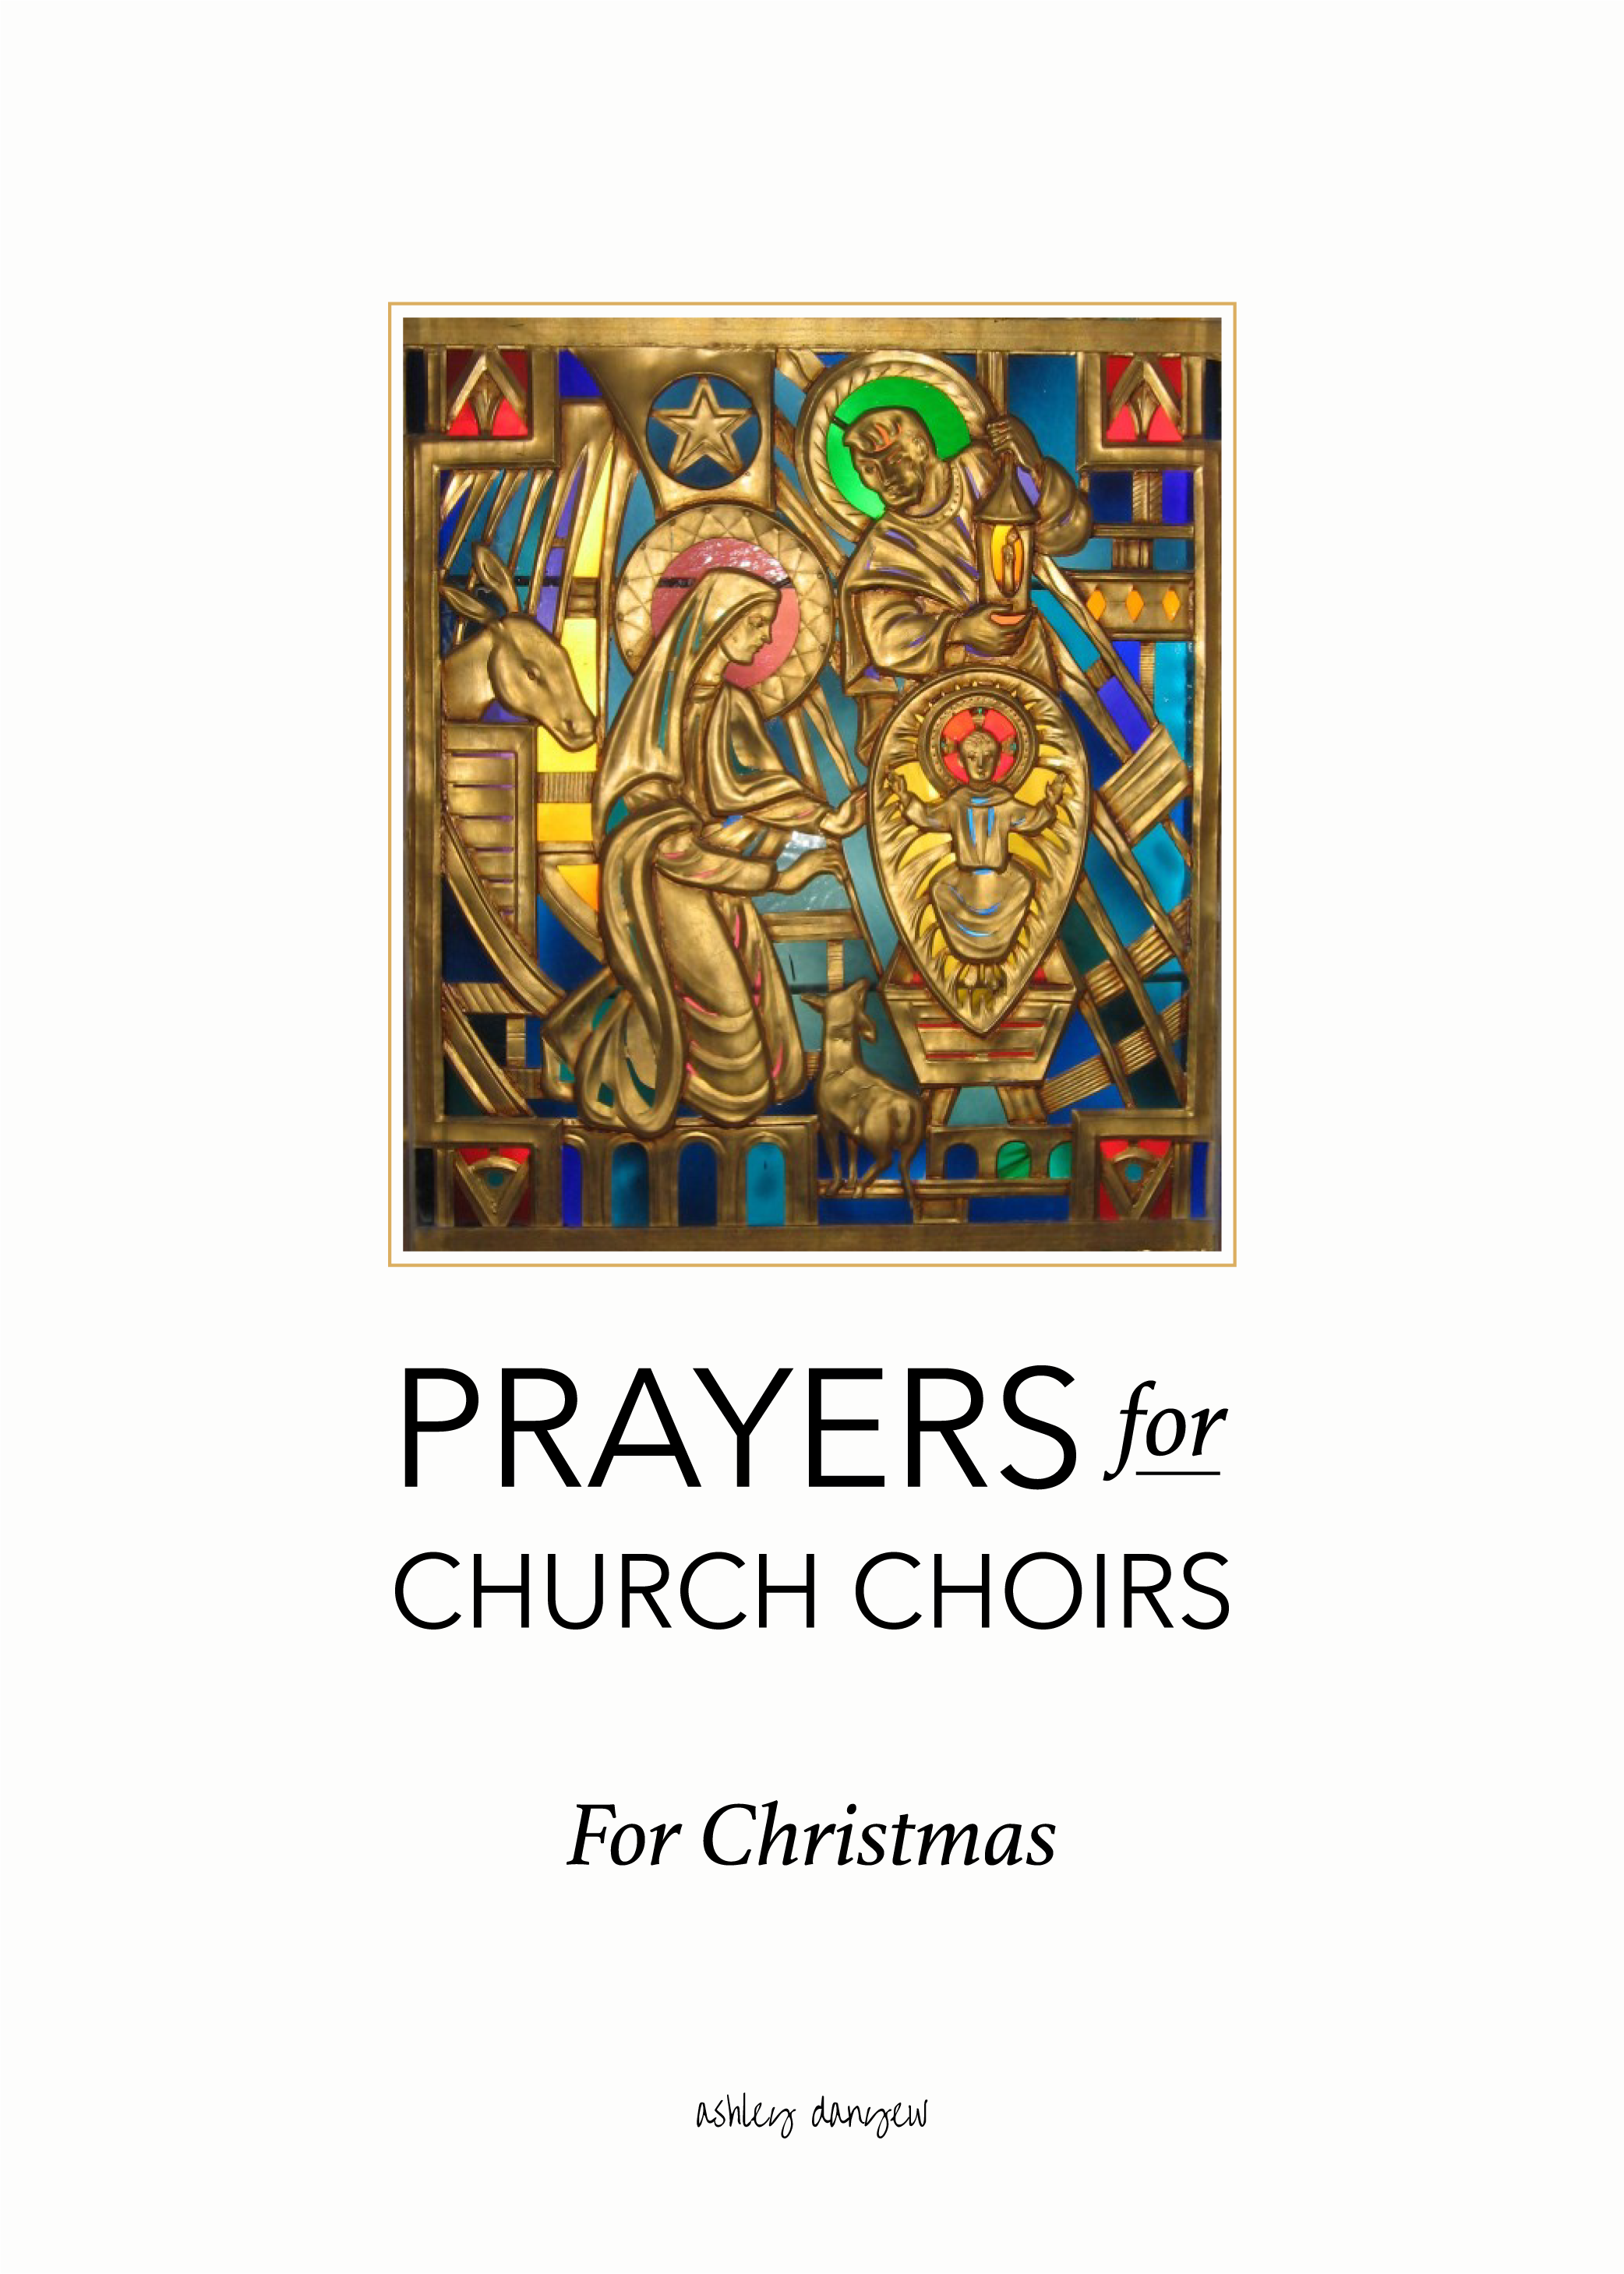 Copy of Prayers for Church Choirs: For Christmas